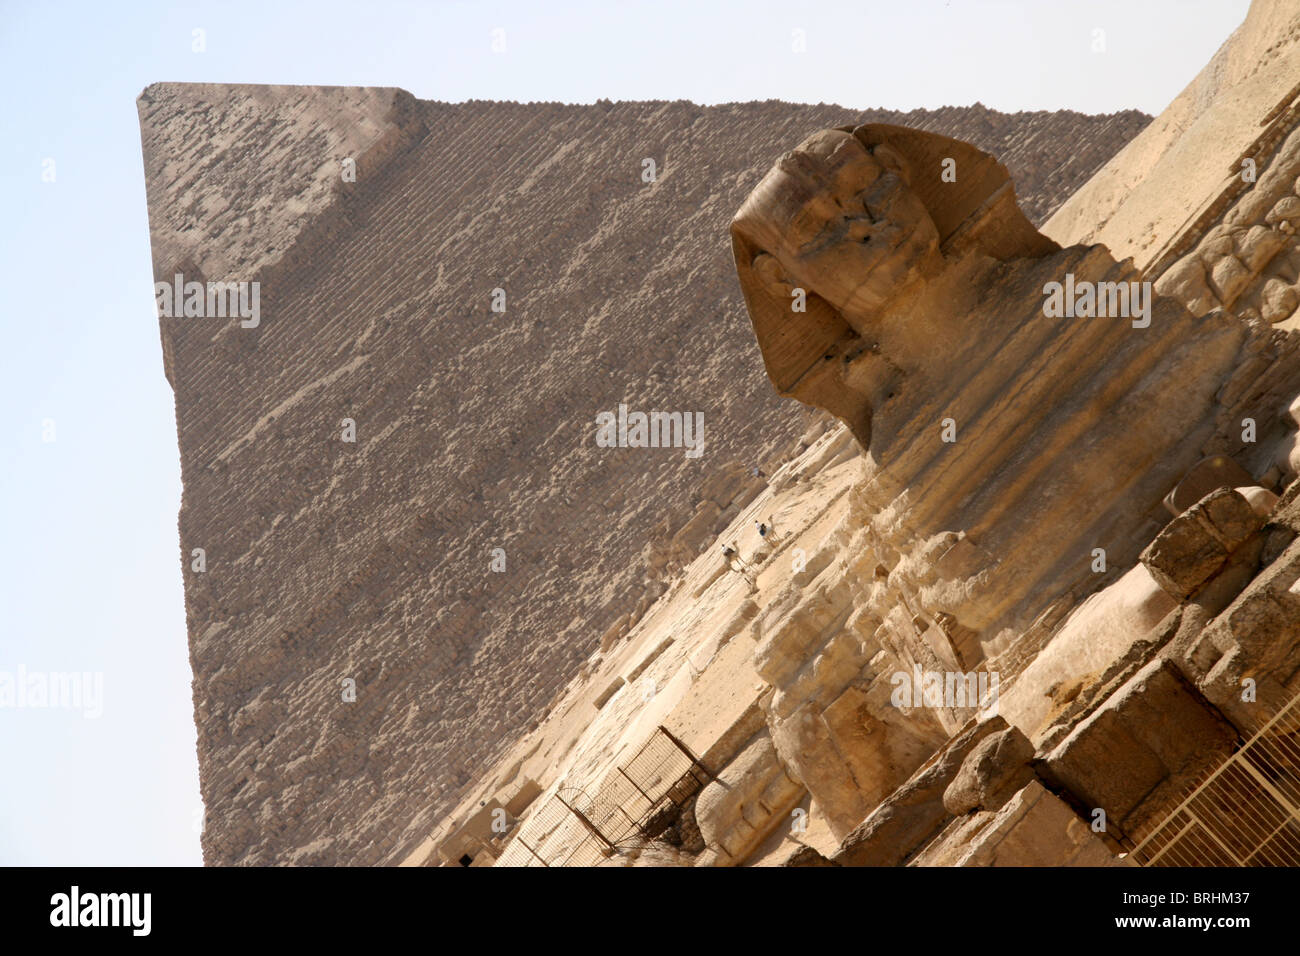 The Sphinx and the pyramids in Egypt. Stock Photo